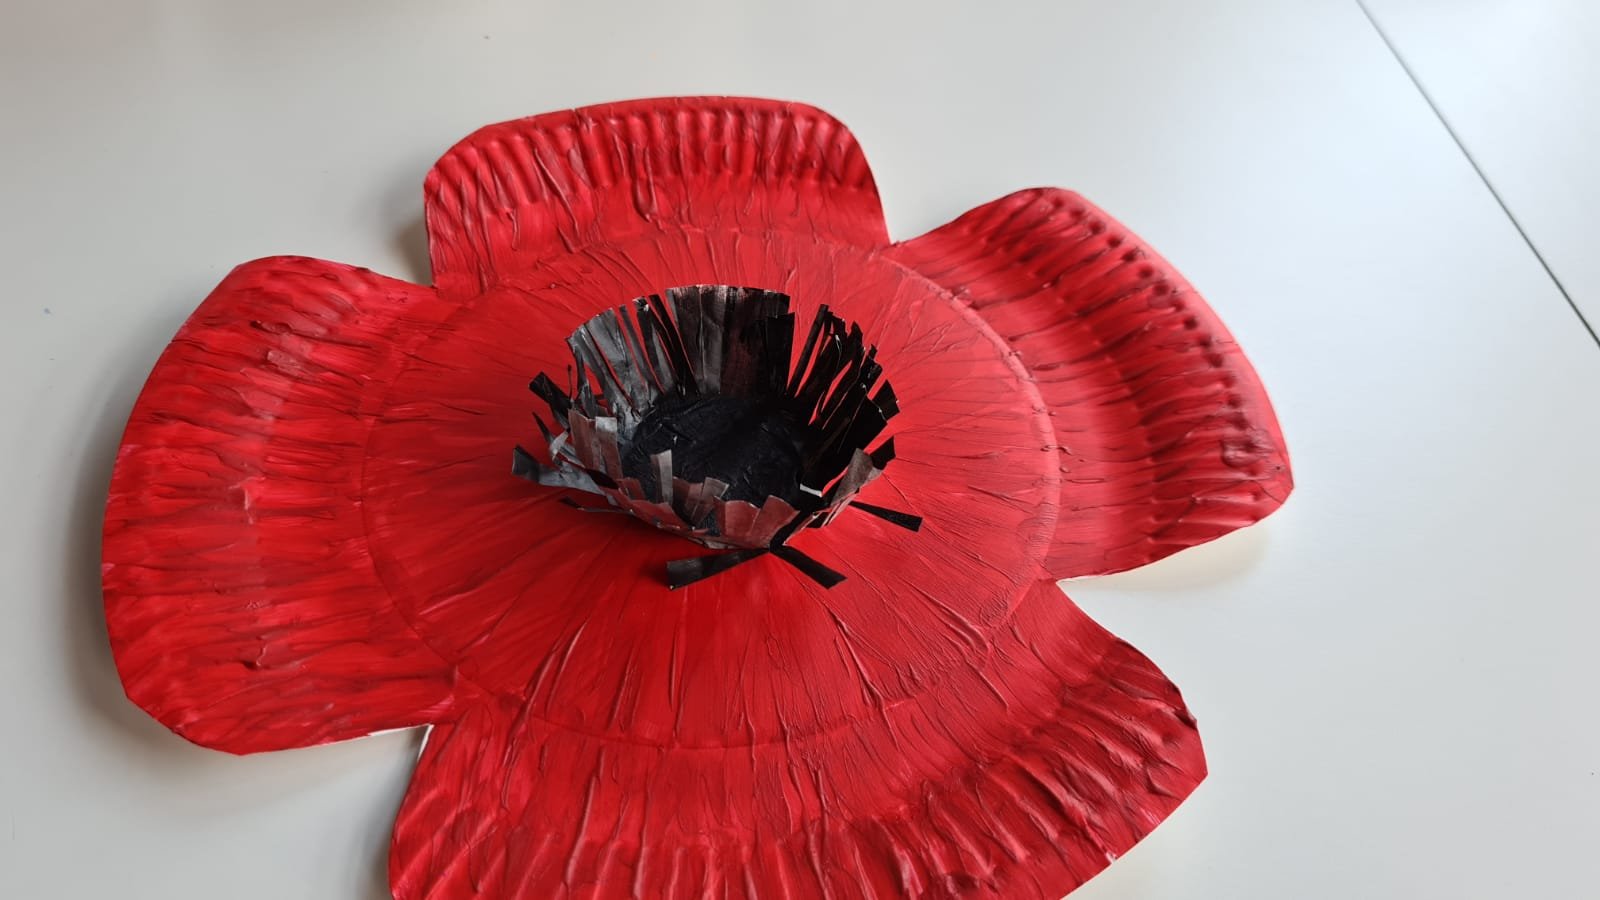 Paper plate cut into poppy shape and painted red with cupcake black stamen glued to middle